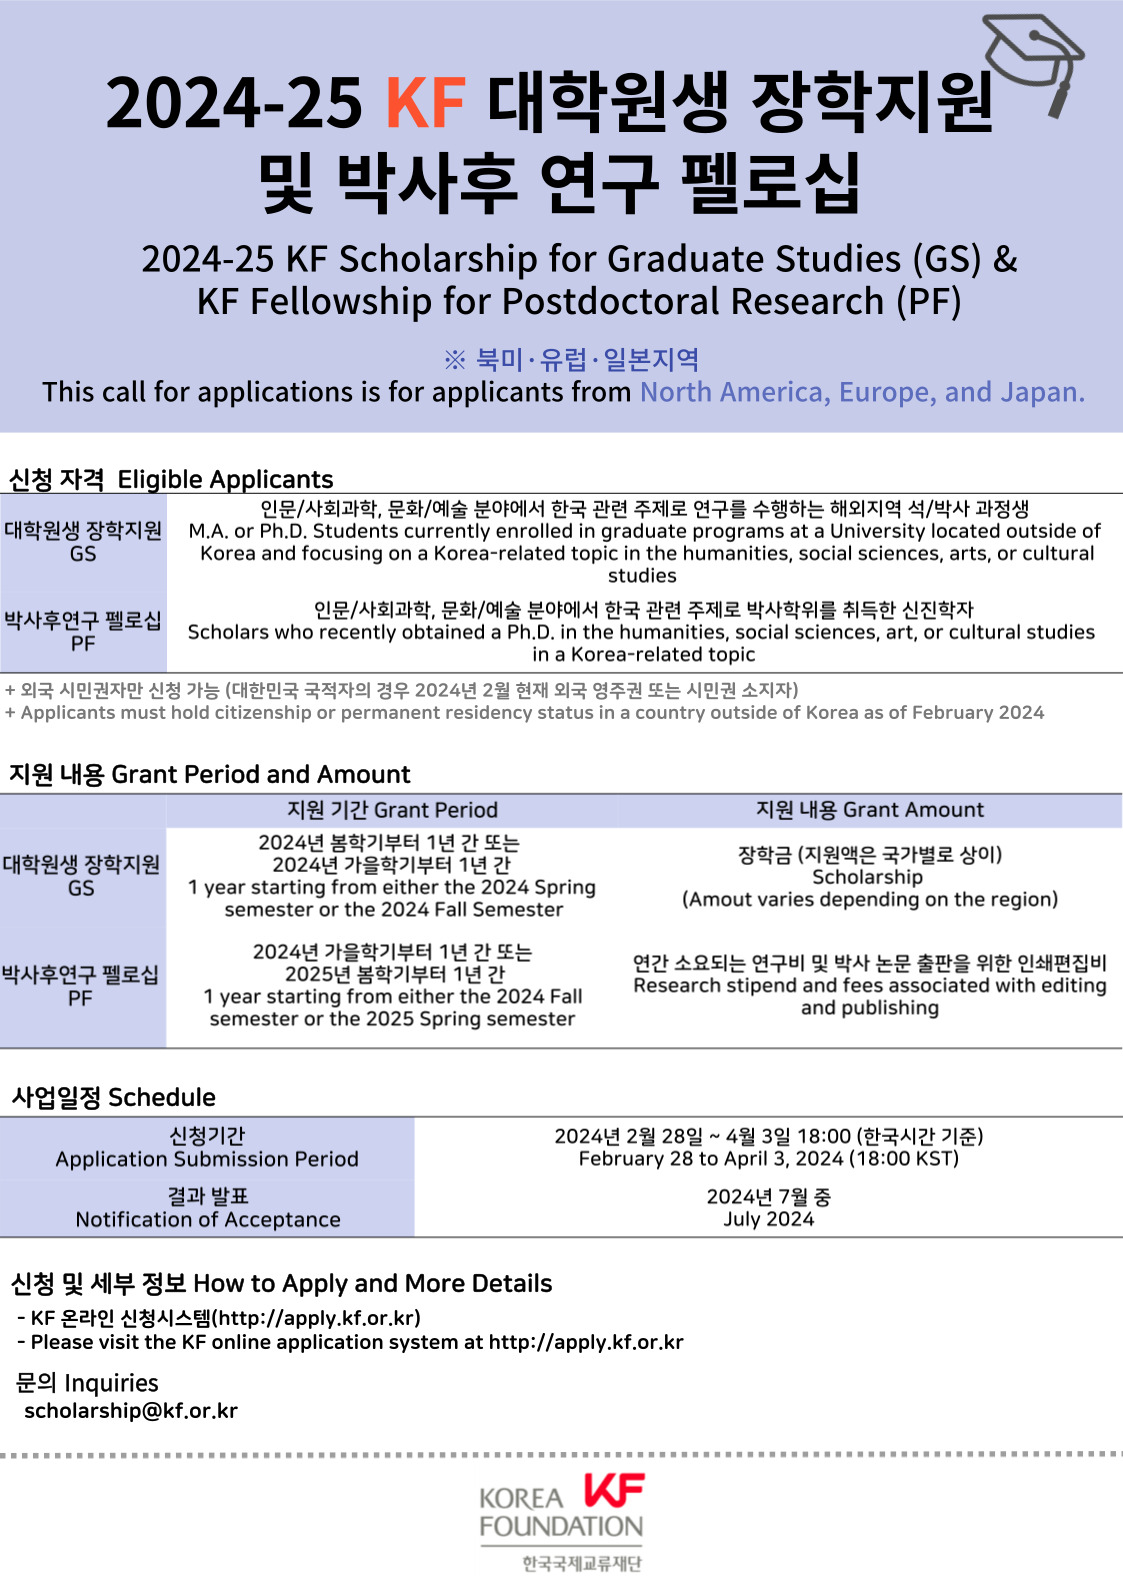  2024-25 KF 대학원생 장학지원 및 박사후 연구펠로십 (2024-25 KF Scholarship for Graduate Studies (GS) & KF Fellowship for Postdoctoral Research (PF)) ※ 북미·유럽·일본지역 (This call for applications is for applicants from North America, Europe, and Japan.) •신청 자격 (Eligible Applicants) 대학원생 장학지원 GS: 인문/사회과학, 문화/예술 분야에서 한국 관련 주제로 연구를 수행하는 해외지역 석/박사과정생 M.A. or Ph.D. Students currently enrolled in graduate programs at a University located outside of (Korea and focusing on a Korea-related topic in the humanities, social sciences, arts, or cultural studies) 박사후연구펠로십 PF: 인문/사회과학, 문화/예술 분야에서 한국 관련 주제로 박사학위를 취득한 신진학자 (Scholars who recently obtained a Ph.D. in the humanities, social sciences, art, or cultural studies in a Korea-related topic) +외국 시민권자만 신청 가능 (대한민국 국적자의 경우 2024년 2월 현재 외국 영주권 또는 시민권 소지자) + (Applicants must hold citizenship or permanent residency status in a country outside of Korea as of February 2024) 지원 내용 (Grant Period and Amount) <대학원생 장학지원 GS > 지원 기간 Grant Period: 2024년 봄학기부터 1년 간 또는 2024년 가을학기부터 1년 간 (1 year starting from either the 2024 Spring semester or the 2024 Fall Semester) 지원 내용 : 장학금 (지원액은 국가별로 상이) (Scholarship) (Amout varies depending on the region) <박사후연구펠로십 PF> 지원 기간 Grant Period: 2024년 가을학기부터 1년 간 또는 2025년 봄학기부터 1년 간 (1 year starting from either the 2024 Fall semester or the 2025 Spring semester) 지원 내용 : 연간 소요되는 연구비 및 박사 논문 출판을 위한 인쇄편집비 (Research stipend and fees associated with edi) 사업일정 (Schedule) 신청기간(Application Submission Period) :2024년 2월 28일 ~ 4월 3일 18:00 (한국시간 기준) February 28 to April 3, 2024 (18:00 KST) 결과 발표(Notification of Acceptance) : 2024년 7월 중 July 2024 신청 및 세부 정보 How to Apply and More Details - KF 온라인 신청시스템(http://apply.kf.or.kr) (Please visit the KF online application system at http://apply.kf.or.kr) 문의(Inquiries) scholarship@kf.or.kr 